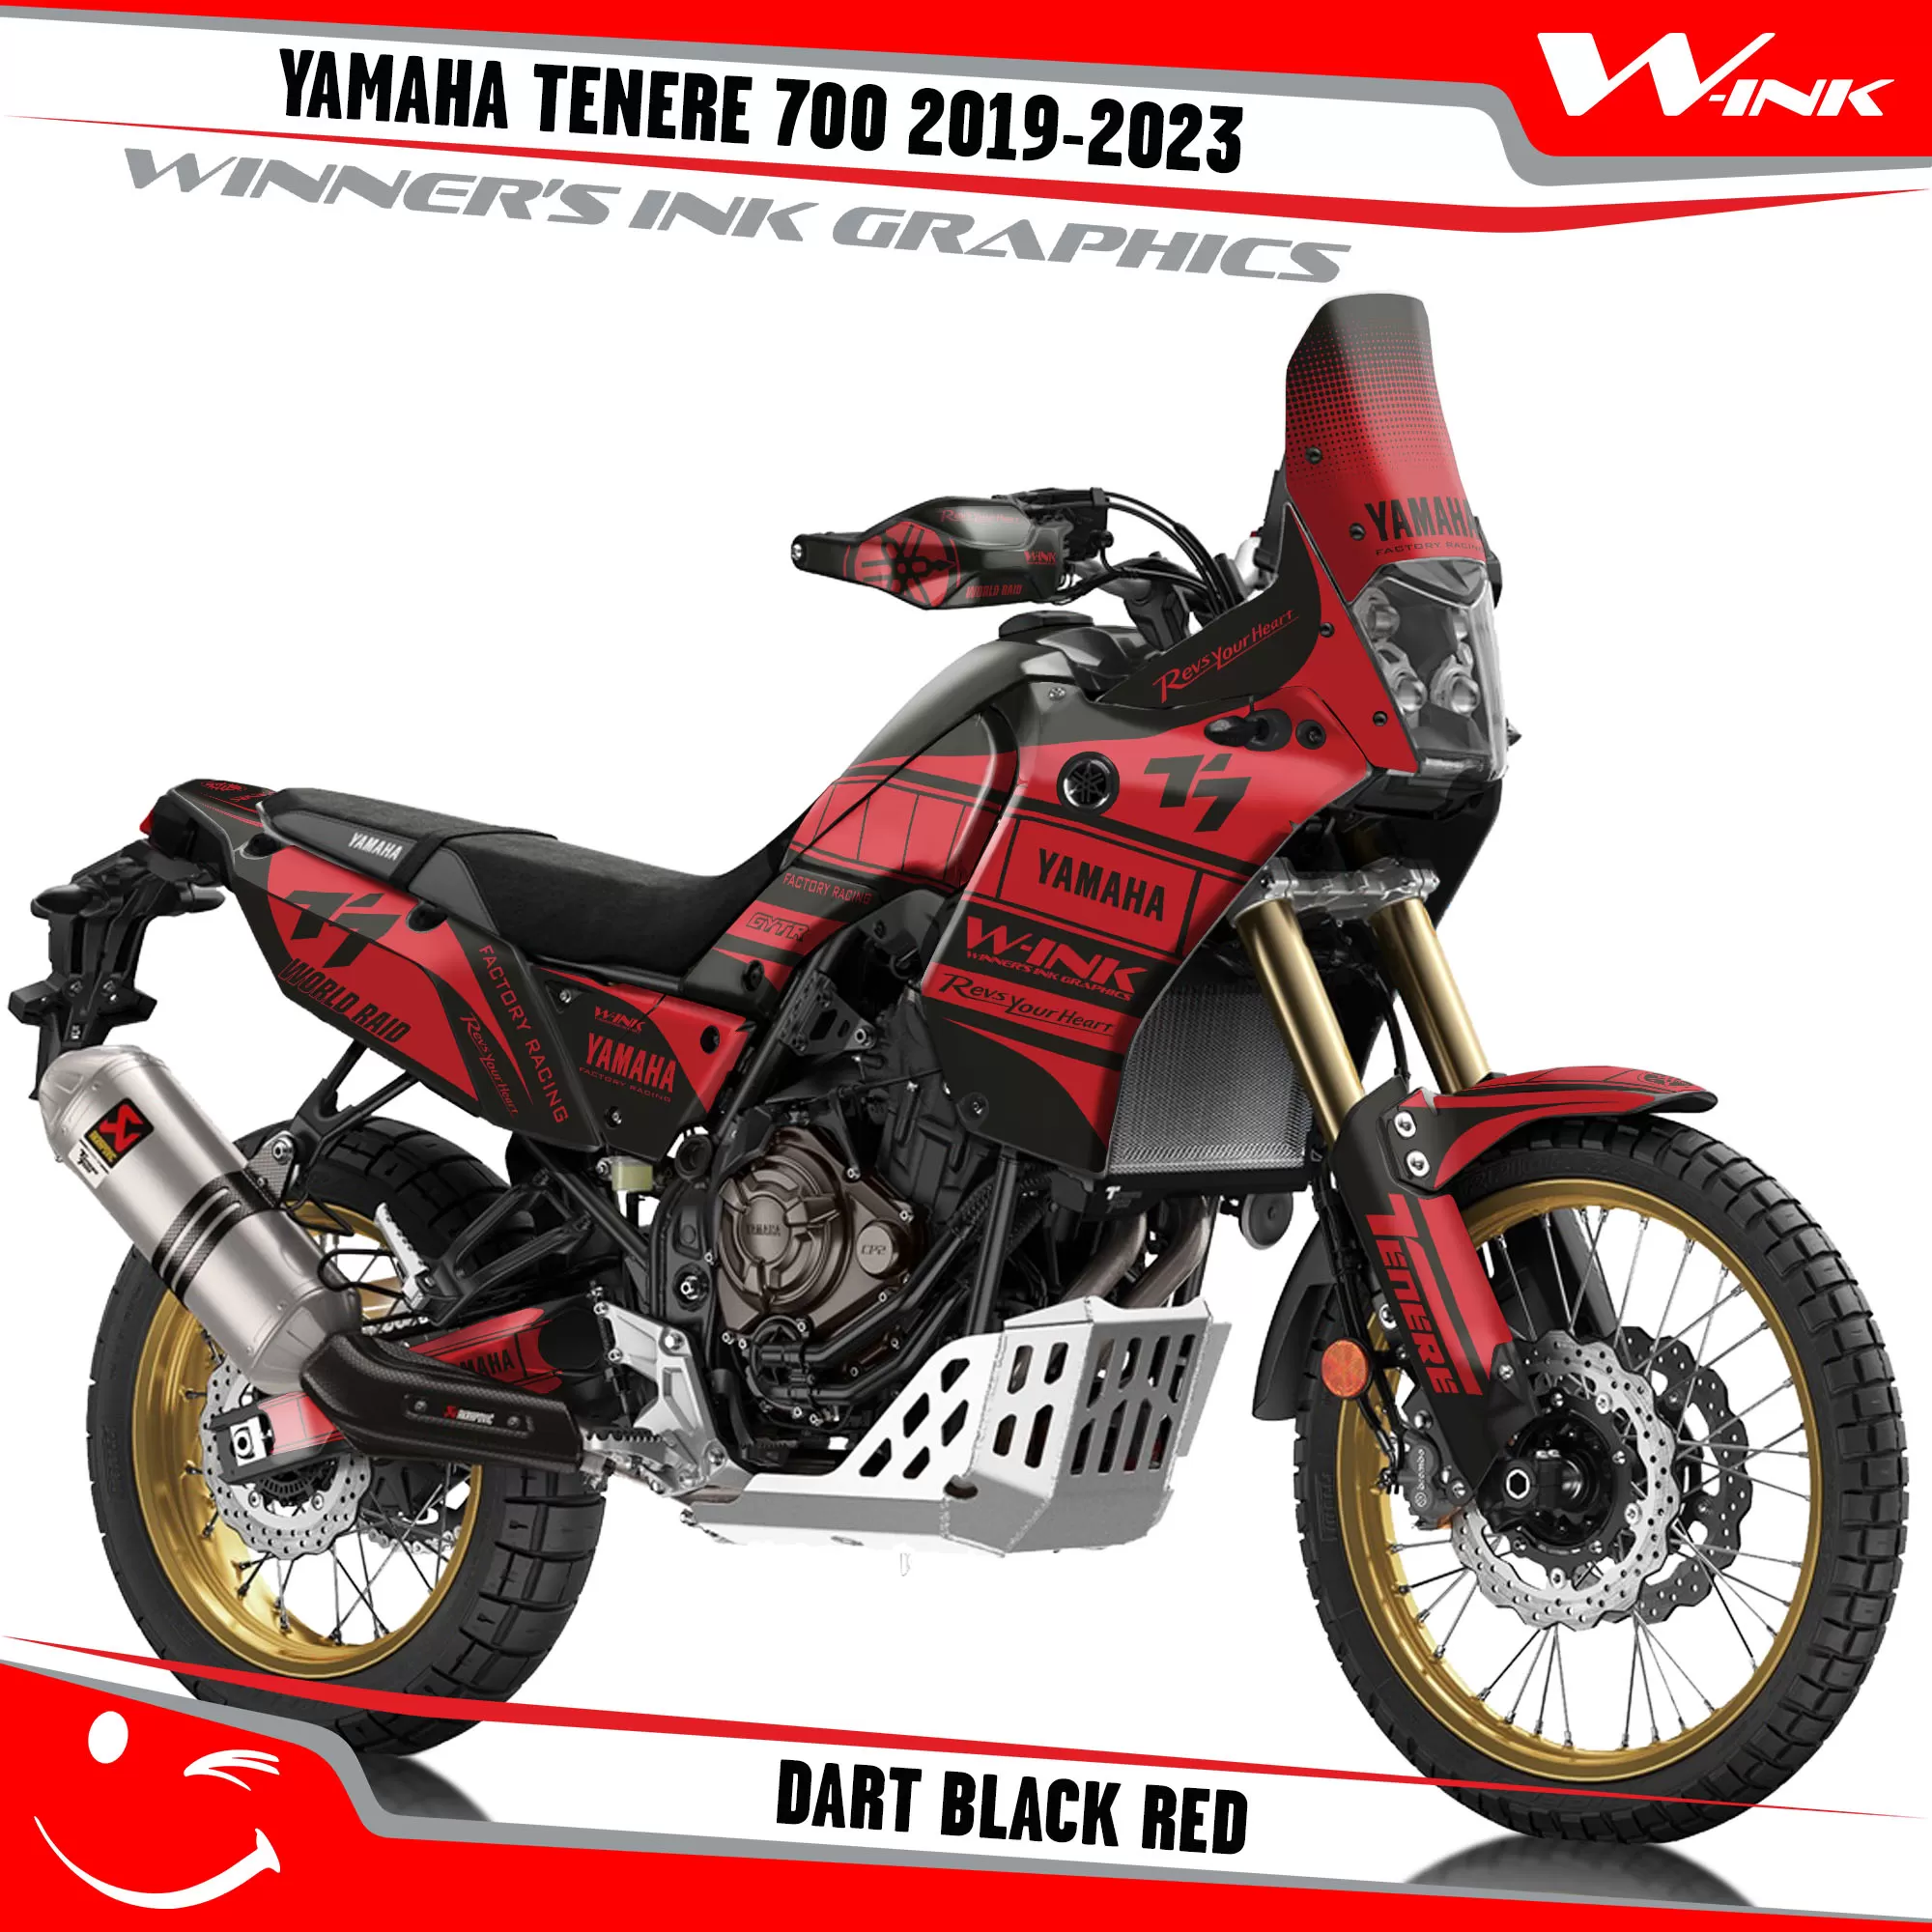 Yamaha-Tenere-700-2019-2020-2021-2022-2023-graphics-kit-and-decals-with-desing-Dart-Full-Black-Red